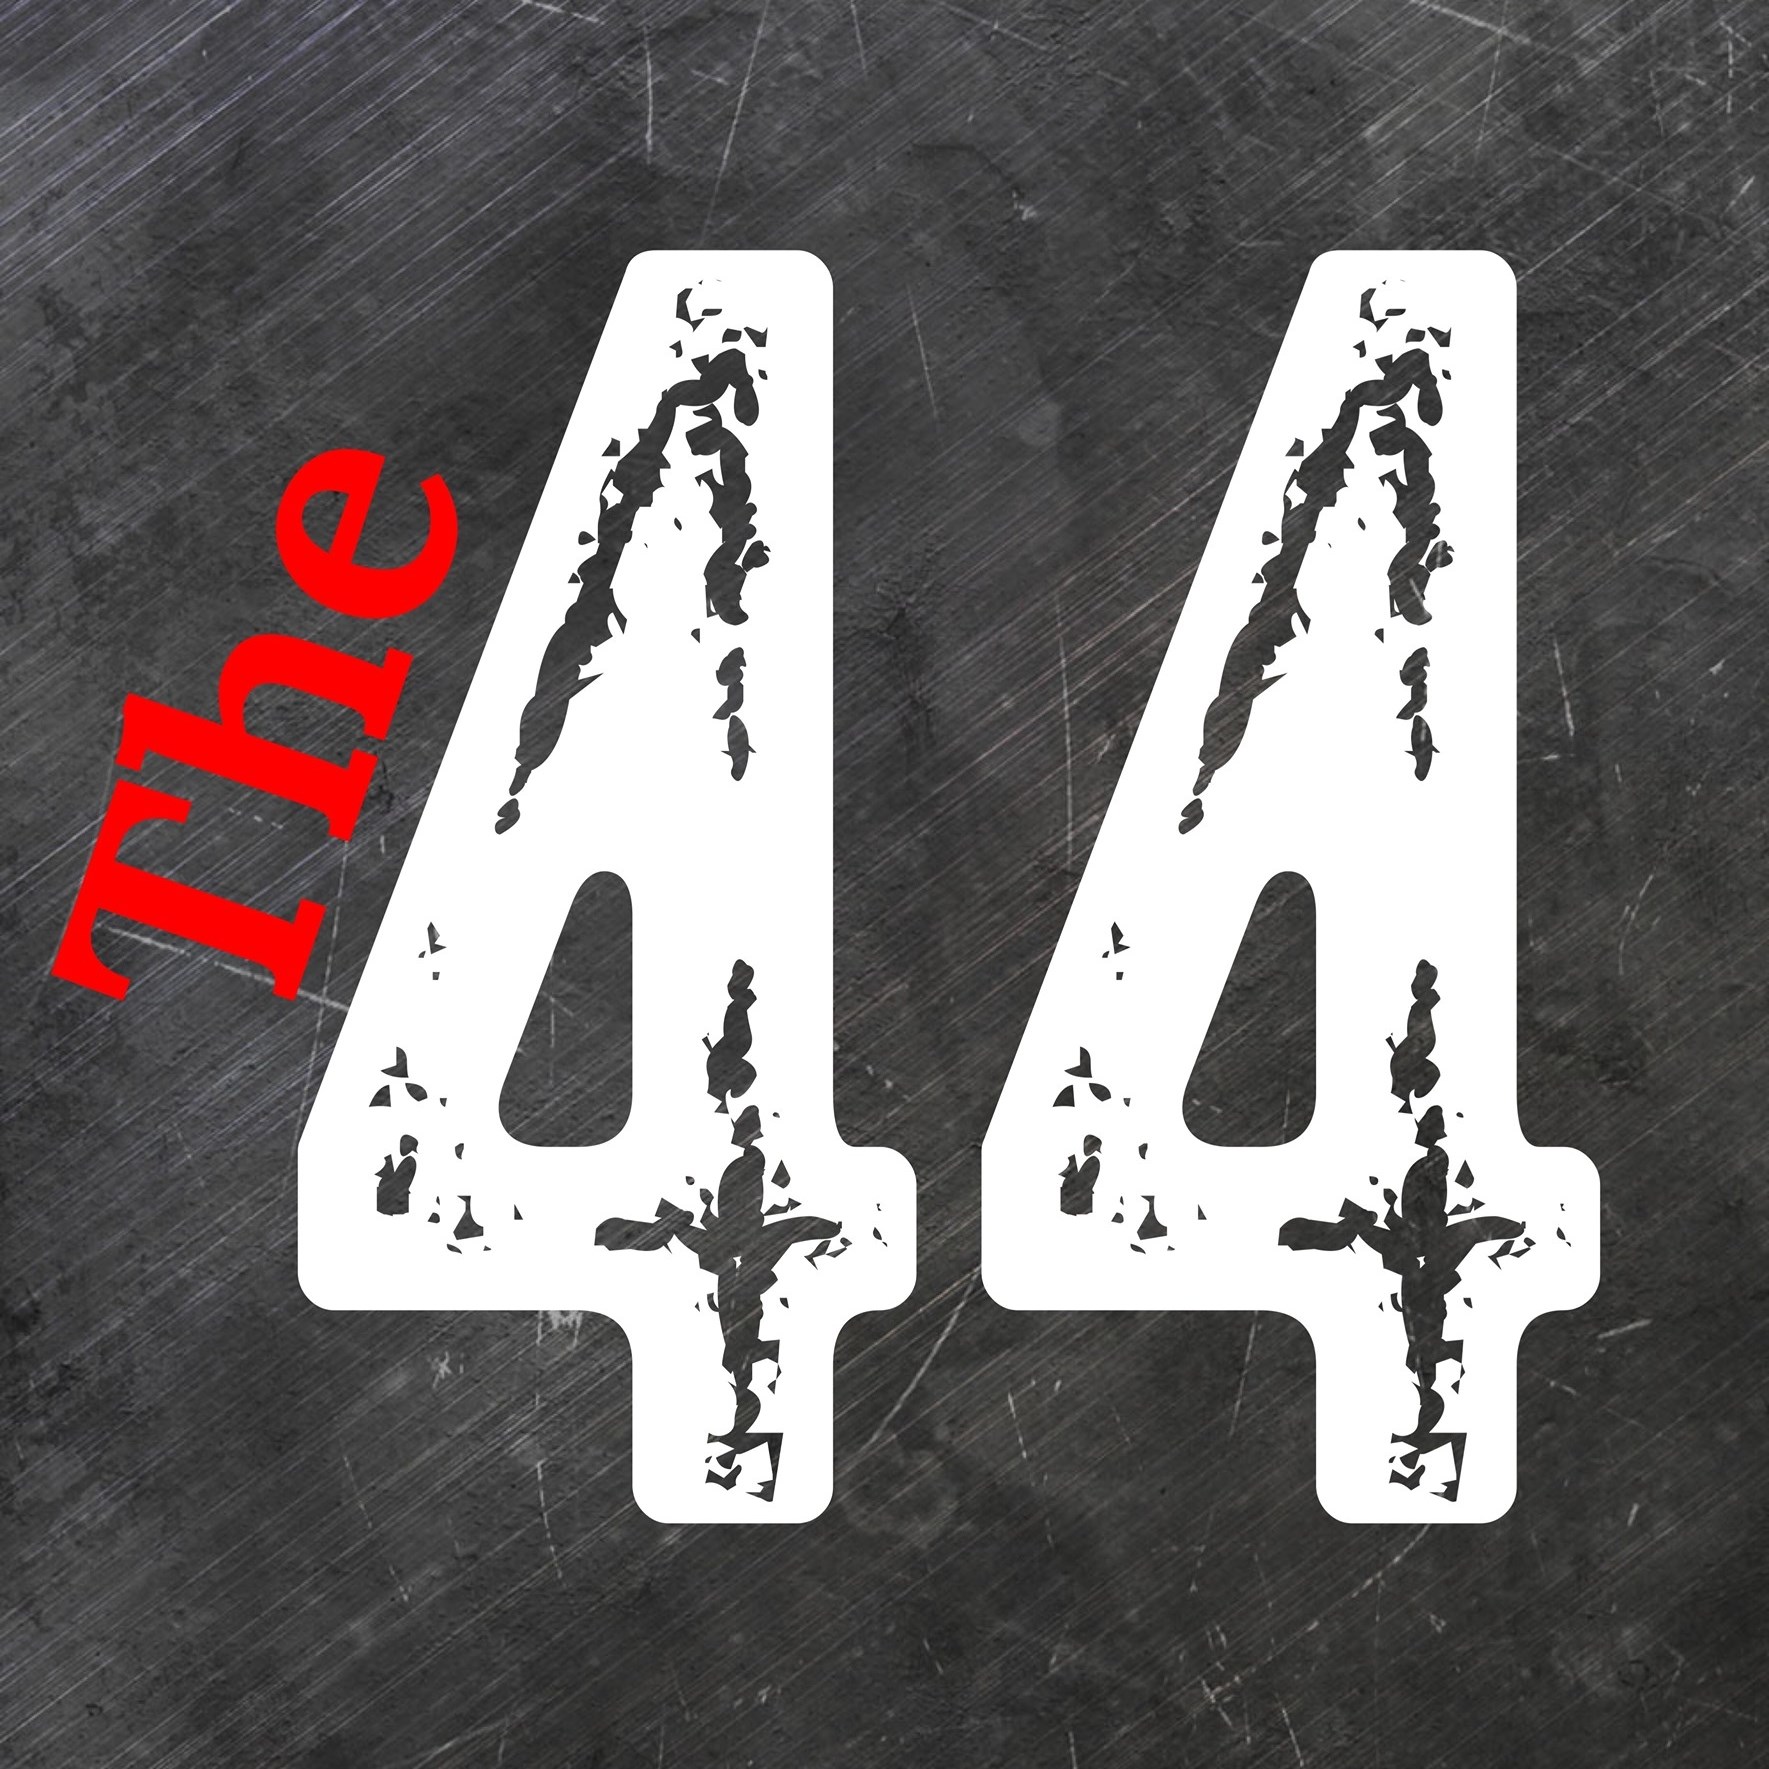 The 44